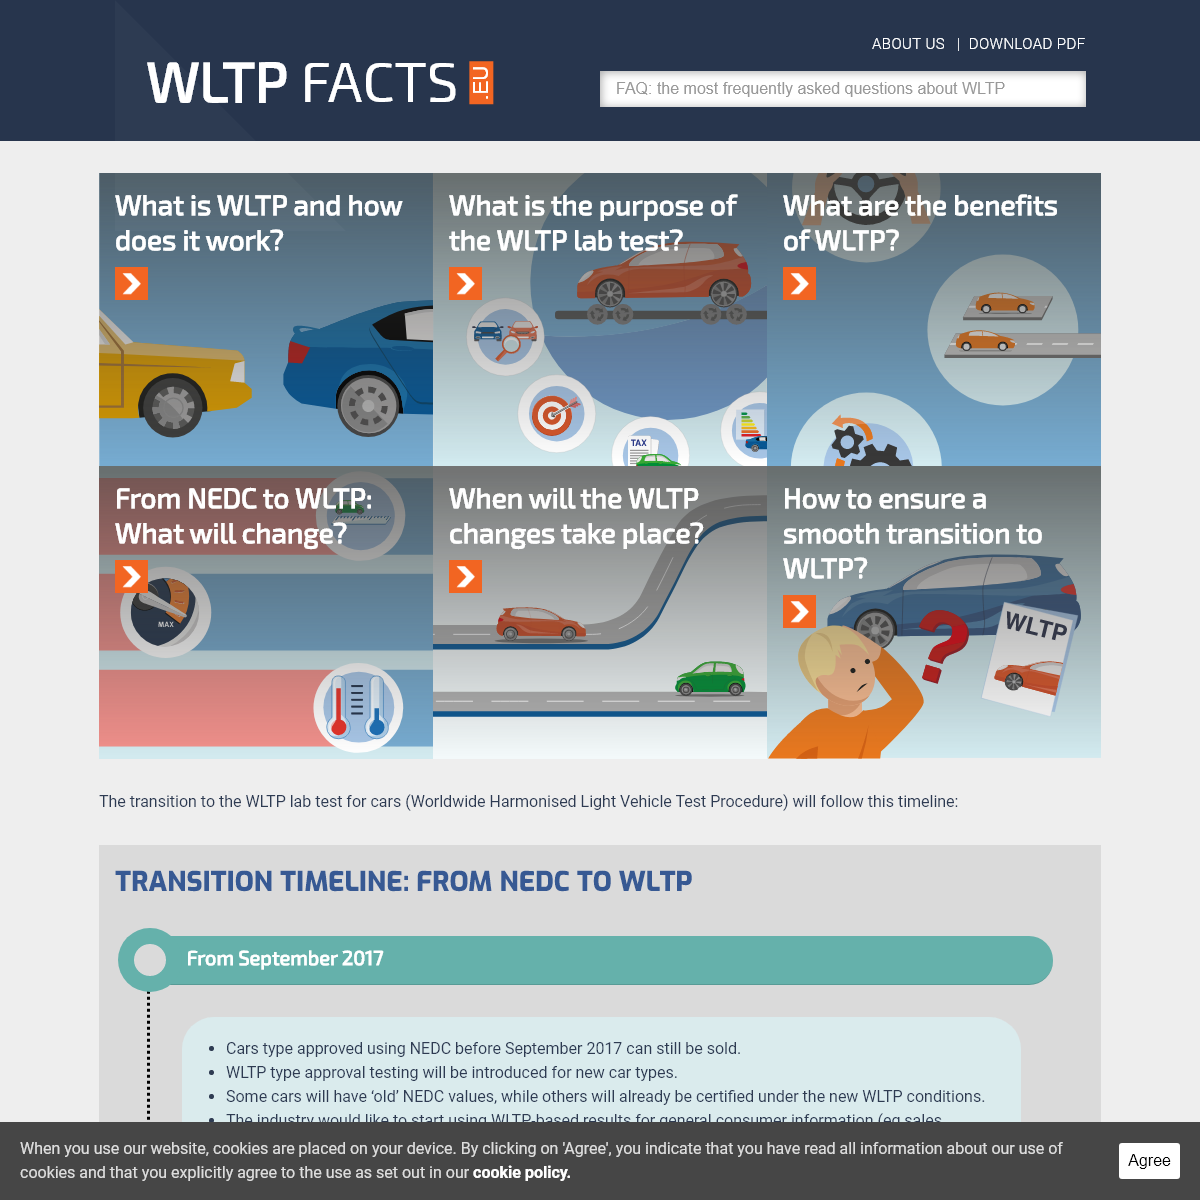 A complete backup of wltpfacts.eu